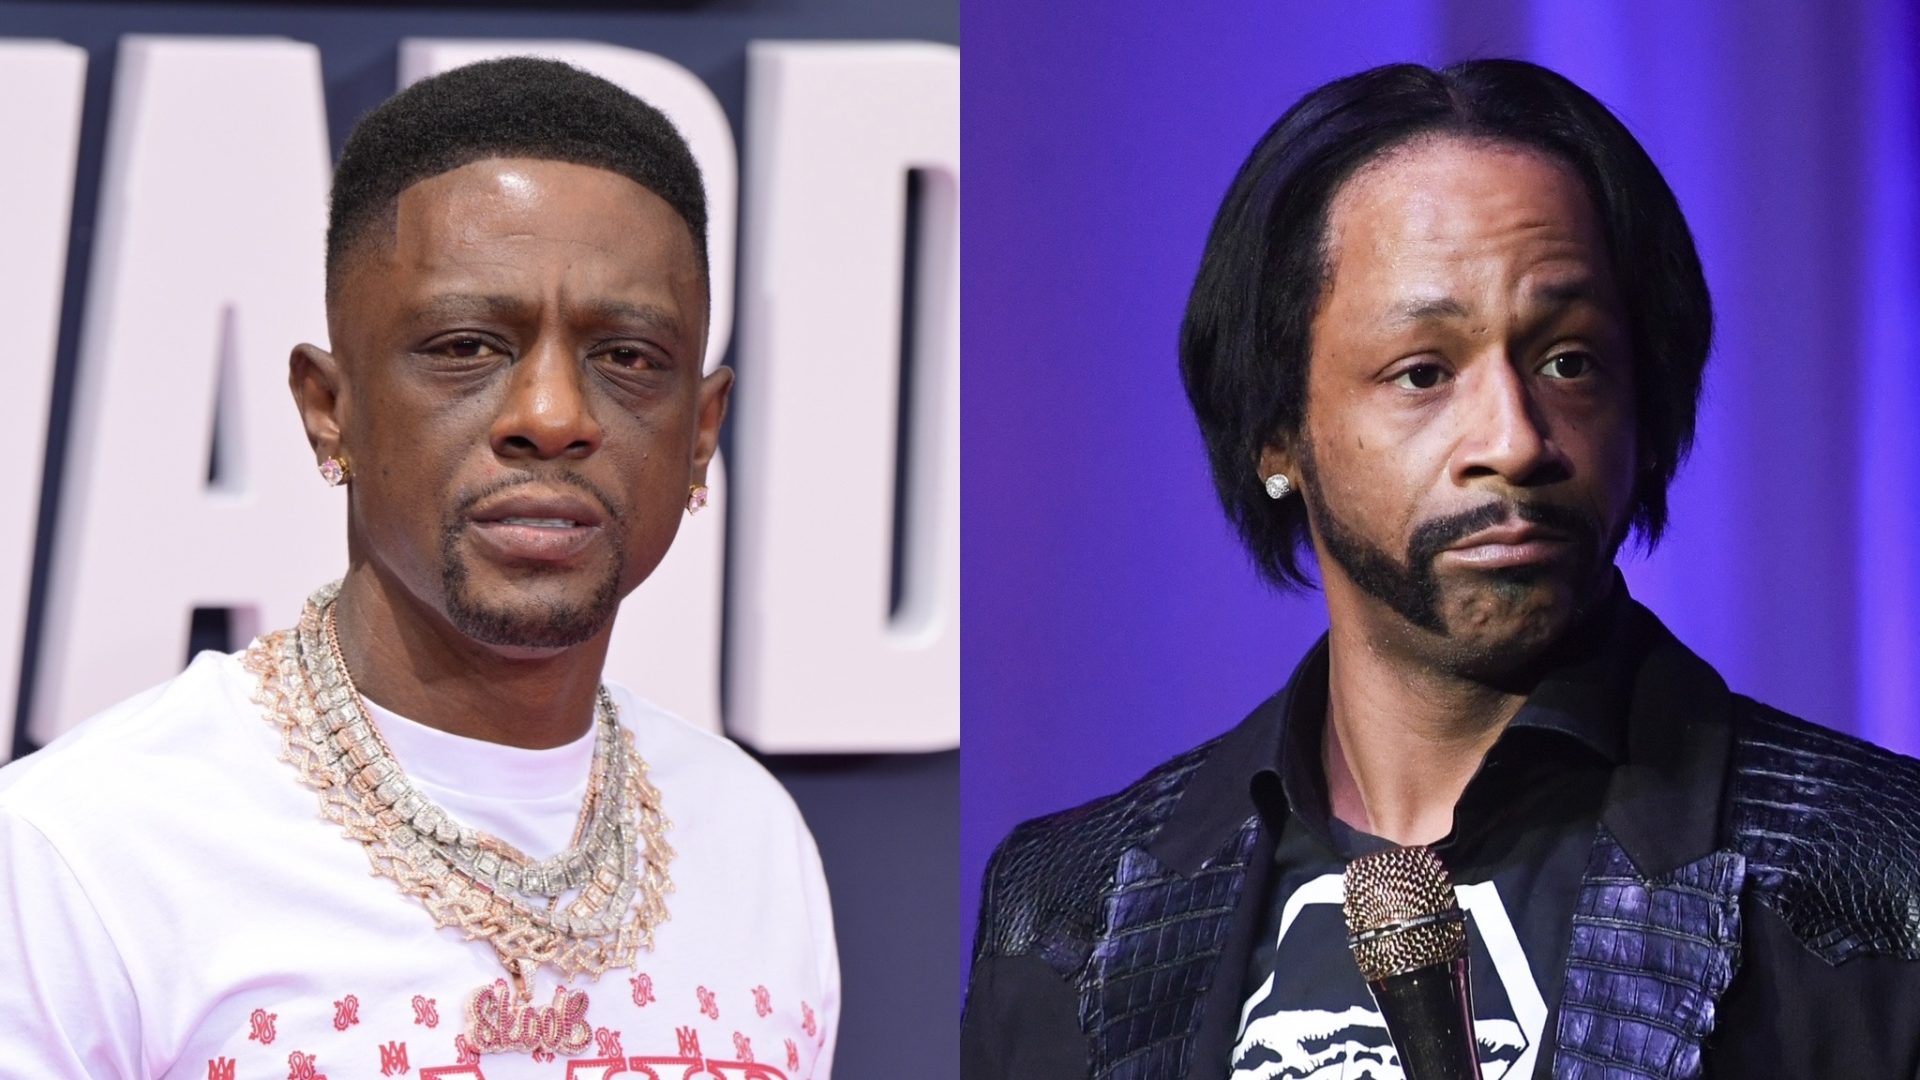 Katt Williams made a serious point about “them” putting Black Men in  Dresses. Thoughts? : r/blackmen